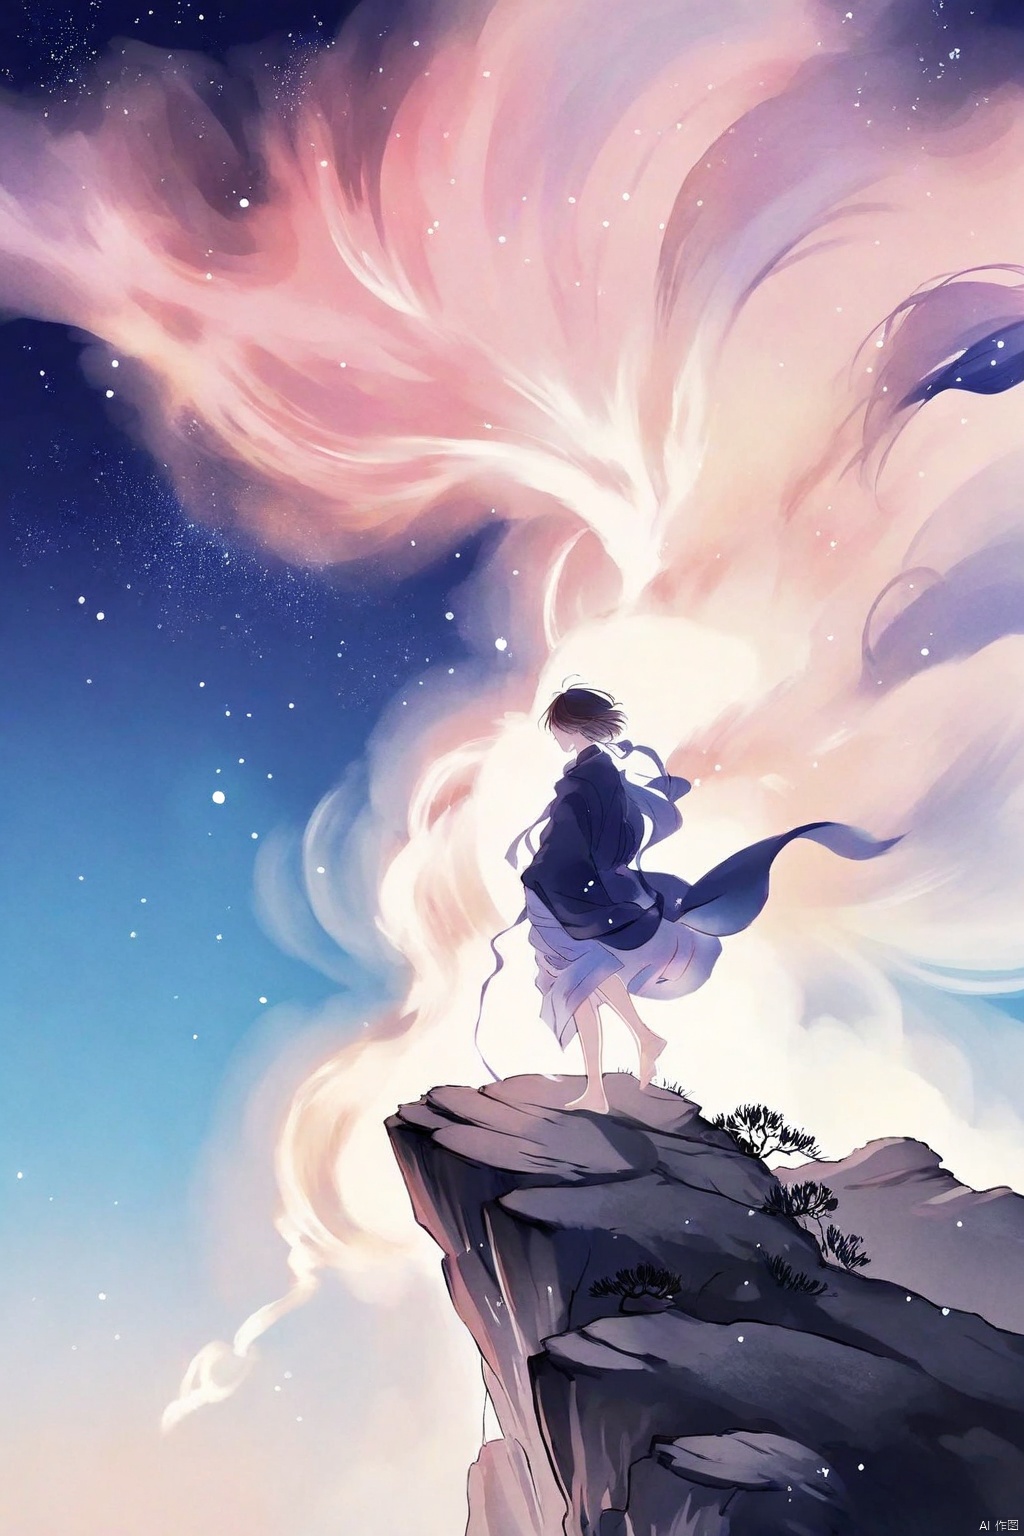 by ajimita, Tie dyeing style, Tie dyeing,Shinkai Makoto style, a whimsical digital illustration of a solitary figure standing on a cliff overlooking the vast starry sky. The figure has a wistful expression, his hair blown by the wind and his robe flowing. The sky is filled with rotating galaxies and constellations, creating a fantastic atmosphere. Bright colors, ethereal lights